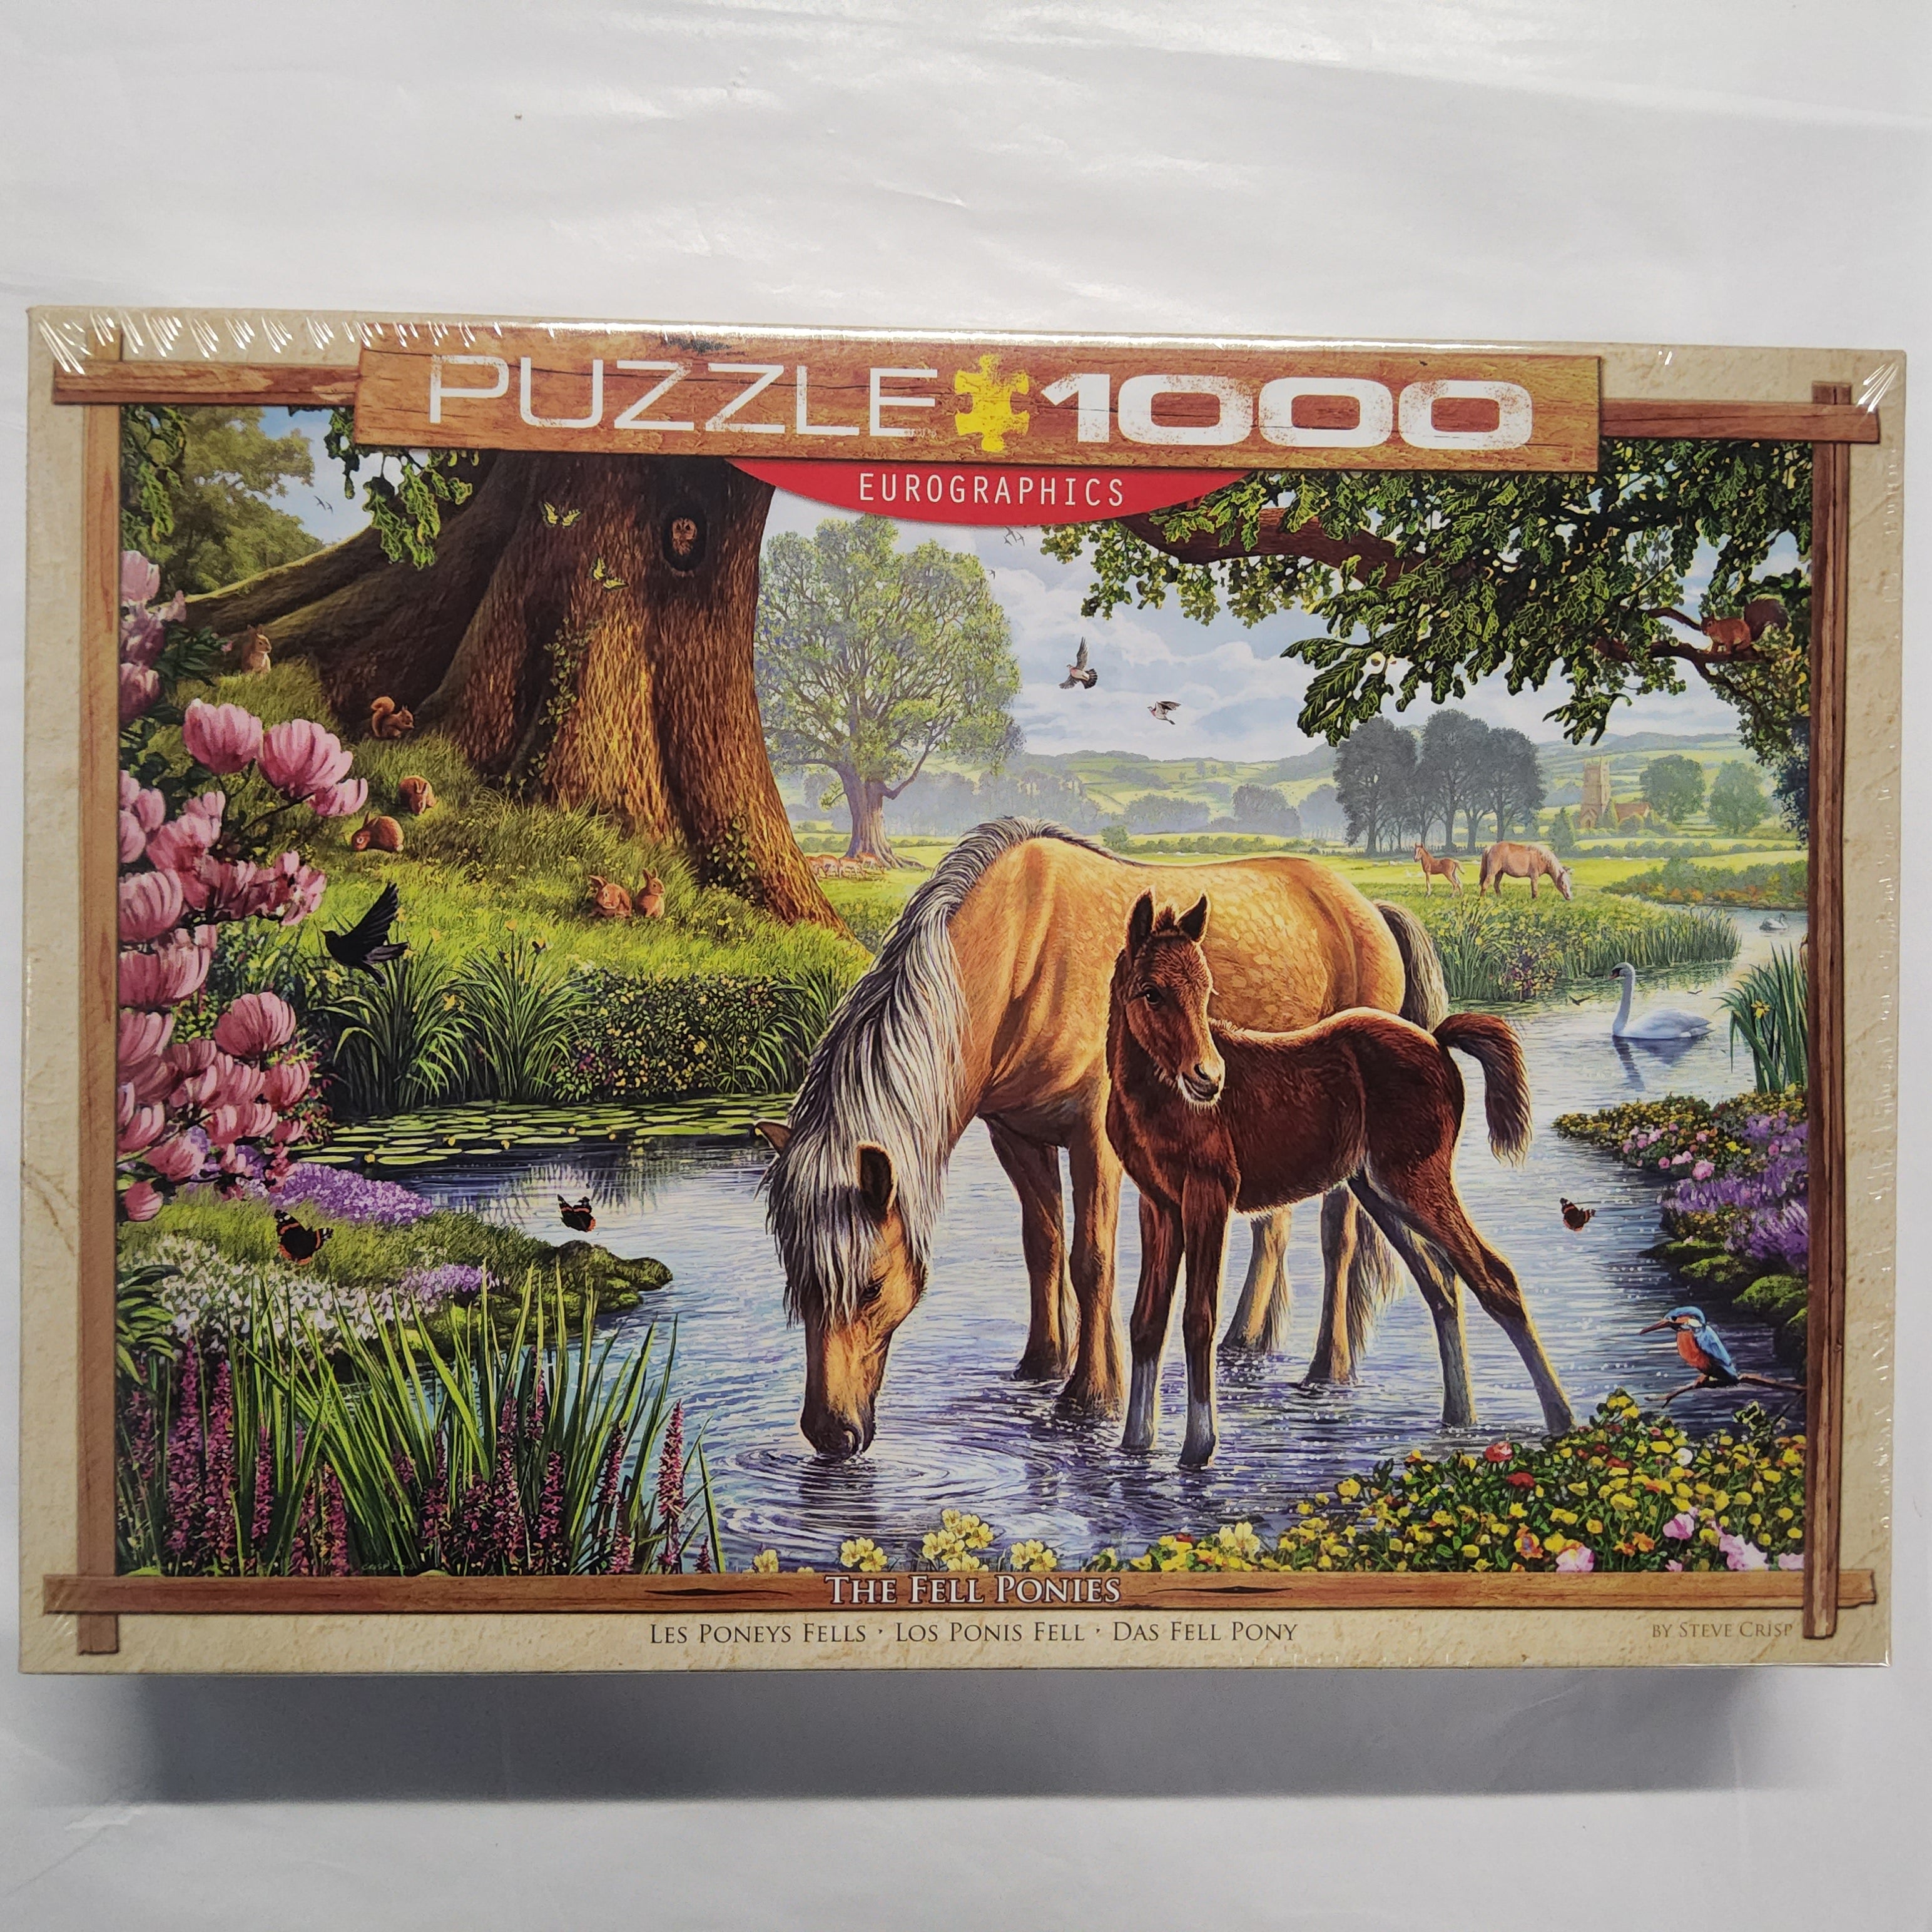 Eurographics Puzzle - The Fell Ponies - 1000 pieces - 6000-0976